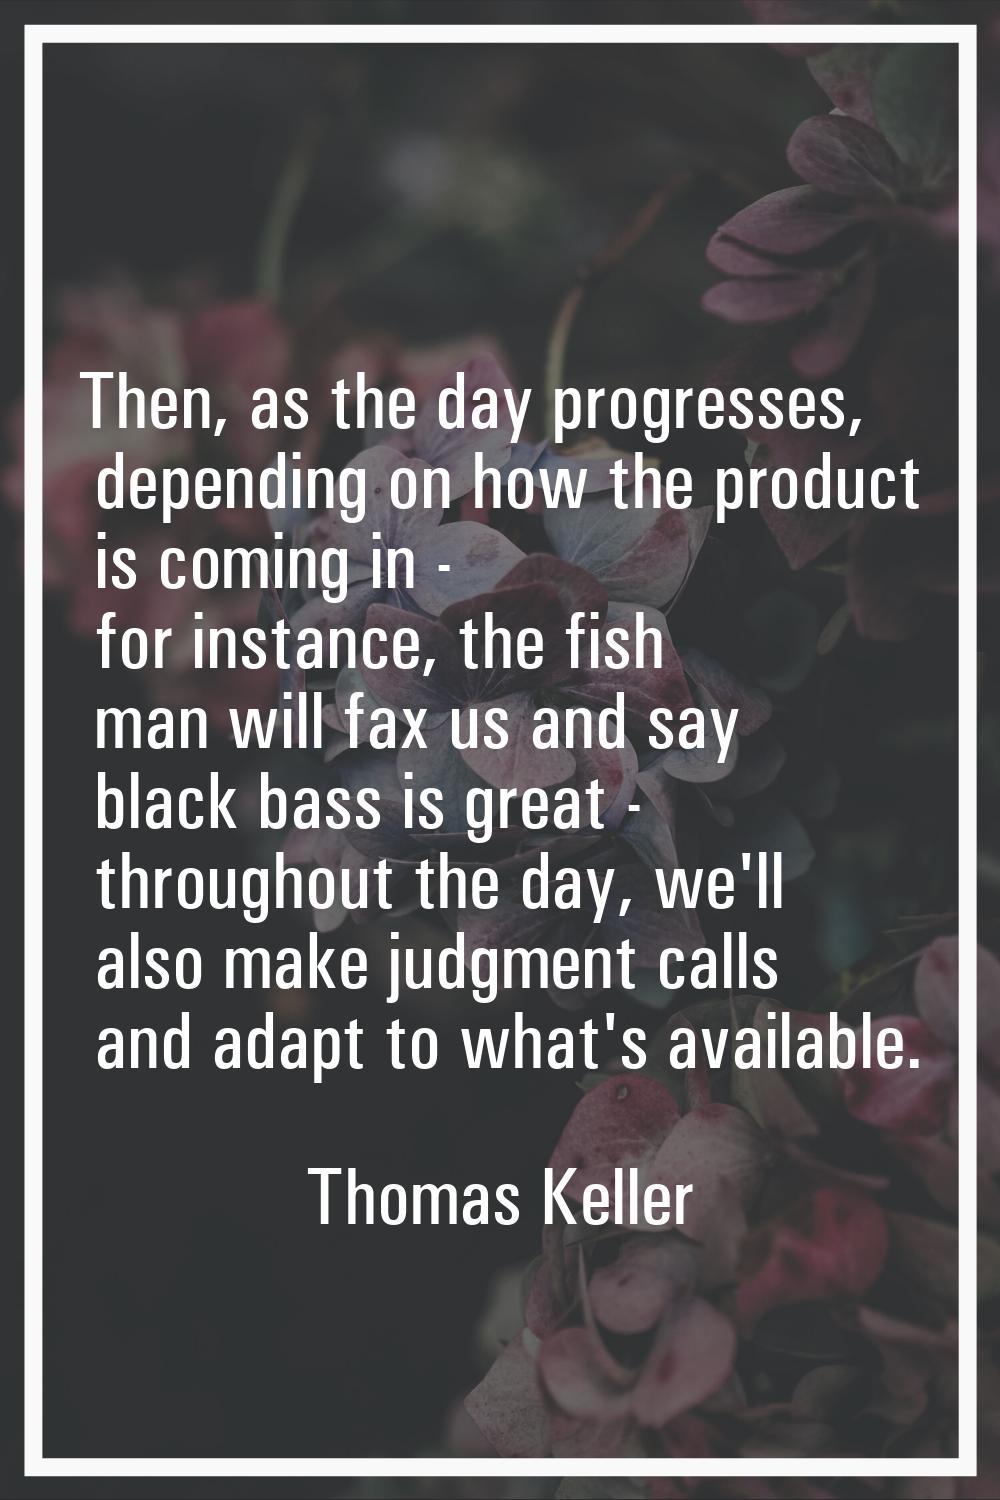 Then, as the day progresses, depending on how the product is coming in - for instance, the fish man